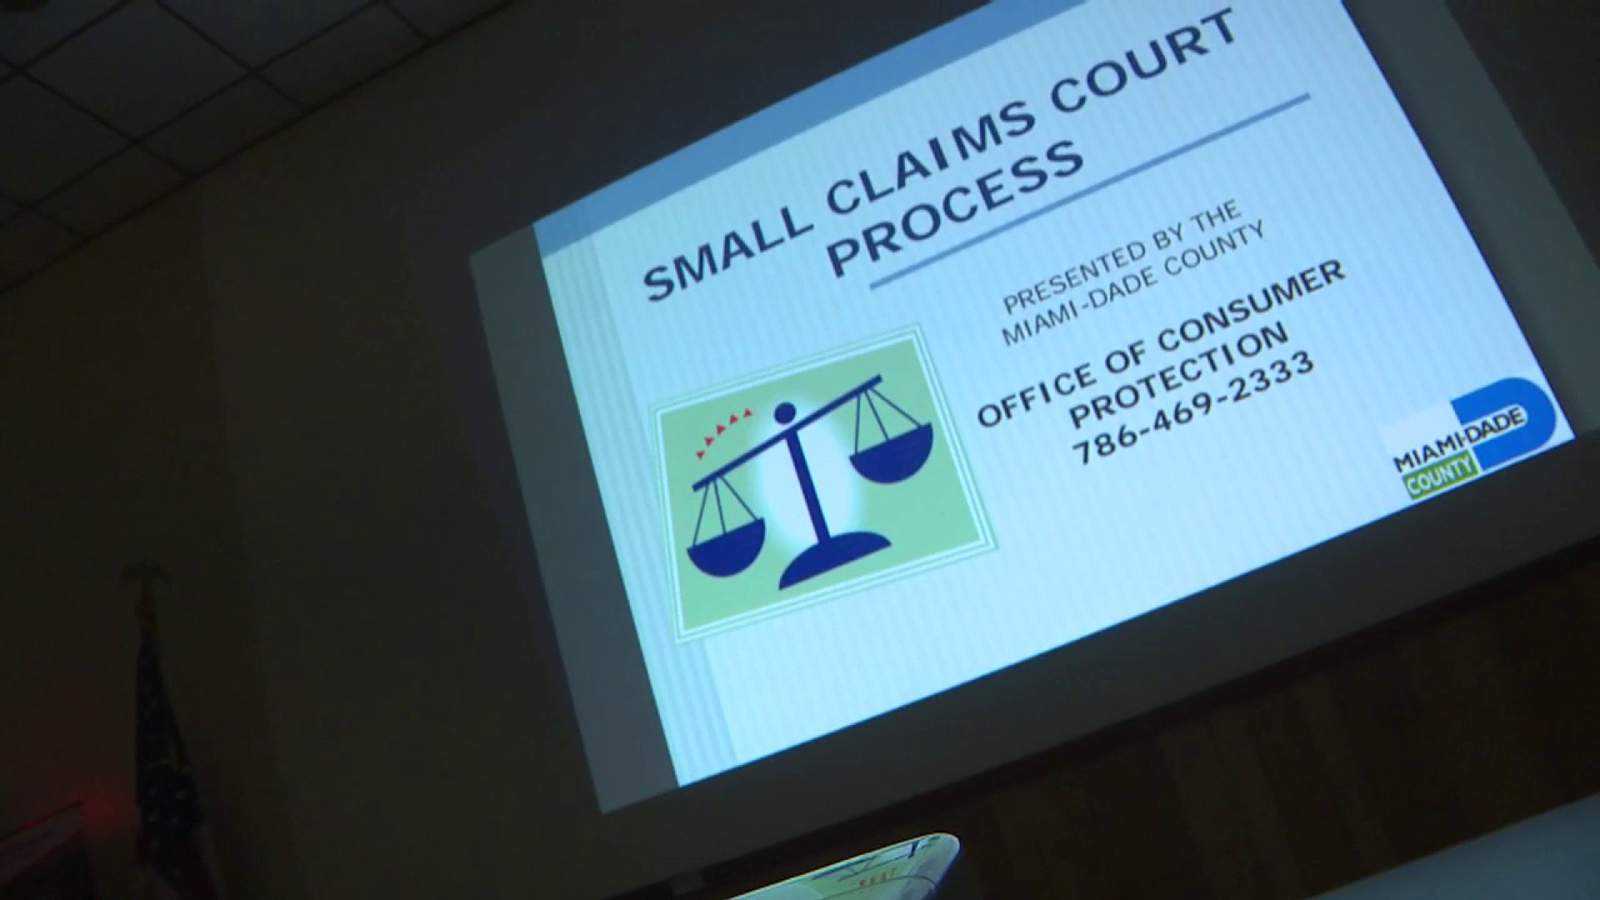 Florida s small claims court now includes cases up to $8 000